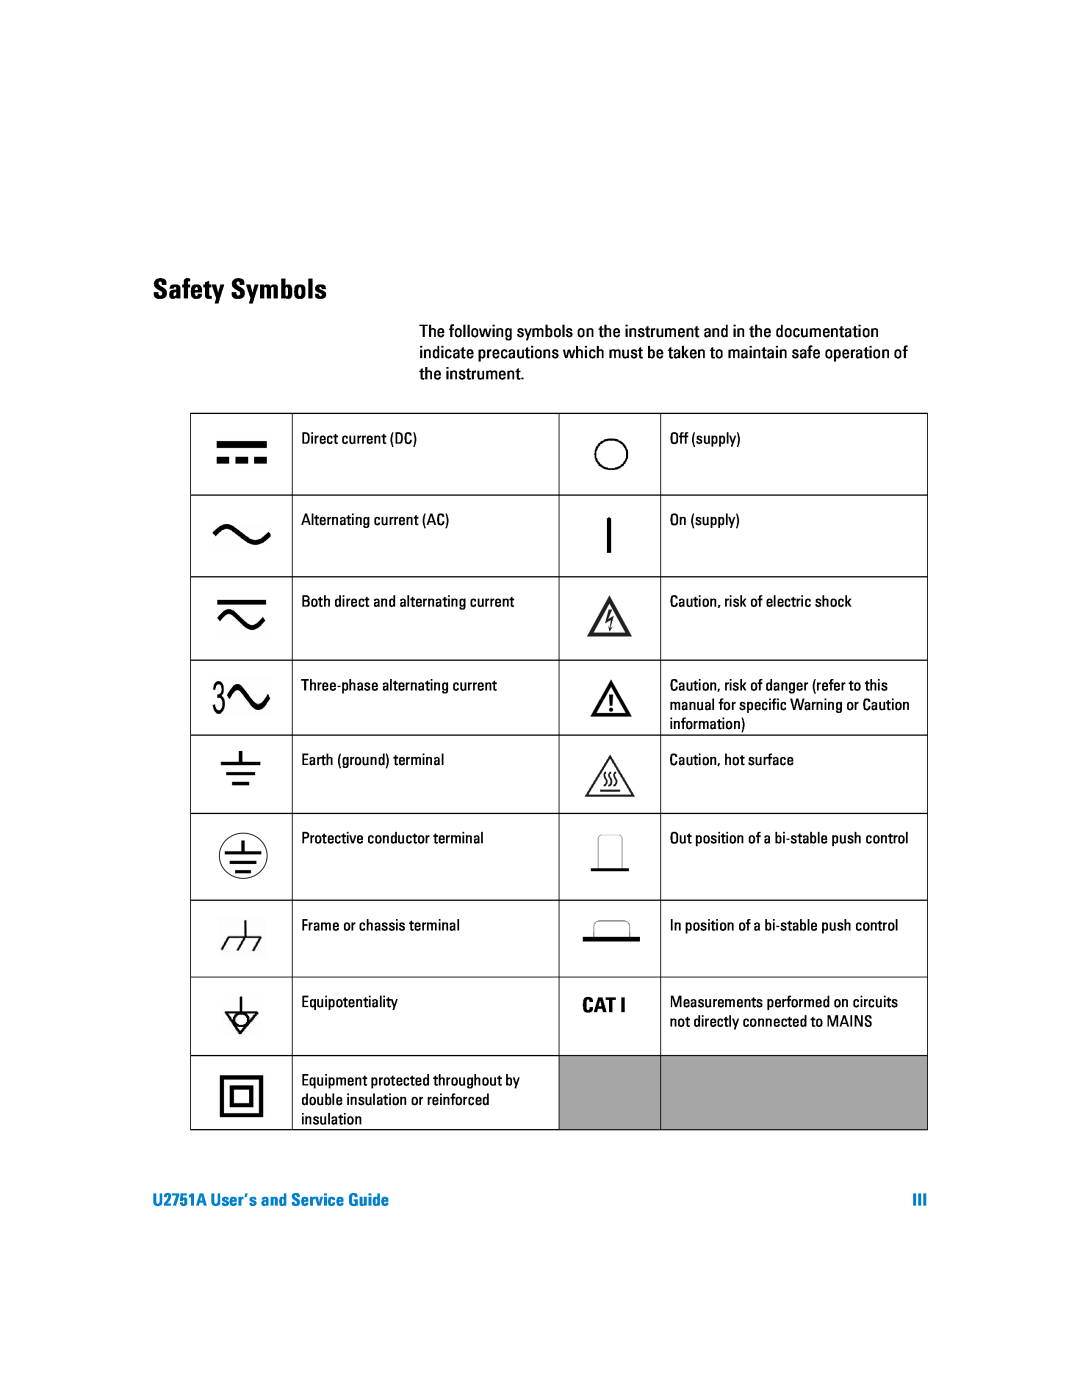 Agilent Technologies manual Safety Symbols, U2751A User’s and Service Guide 